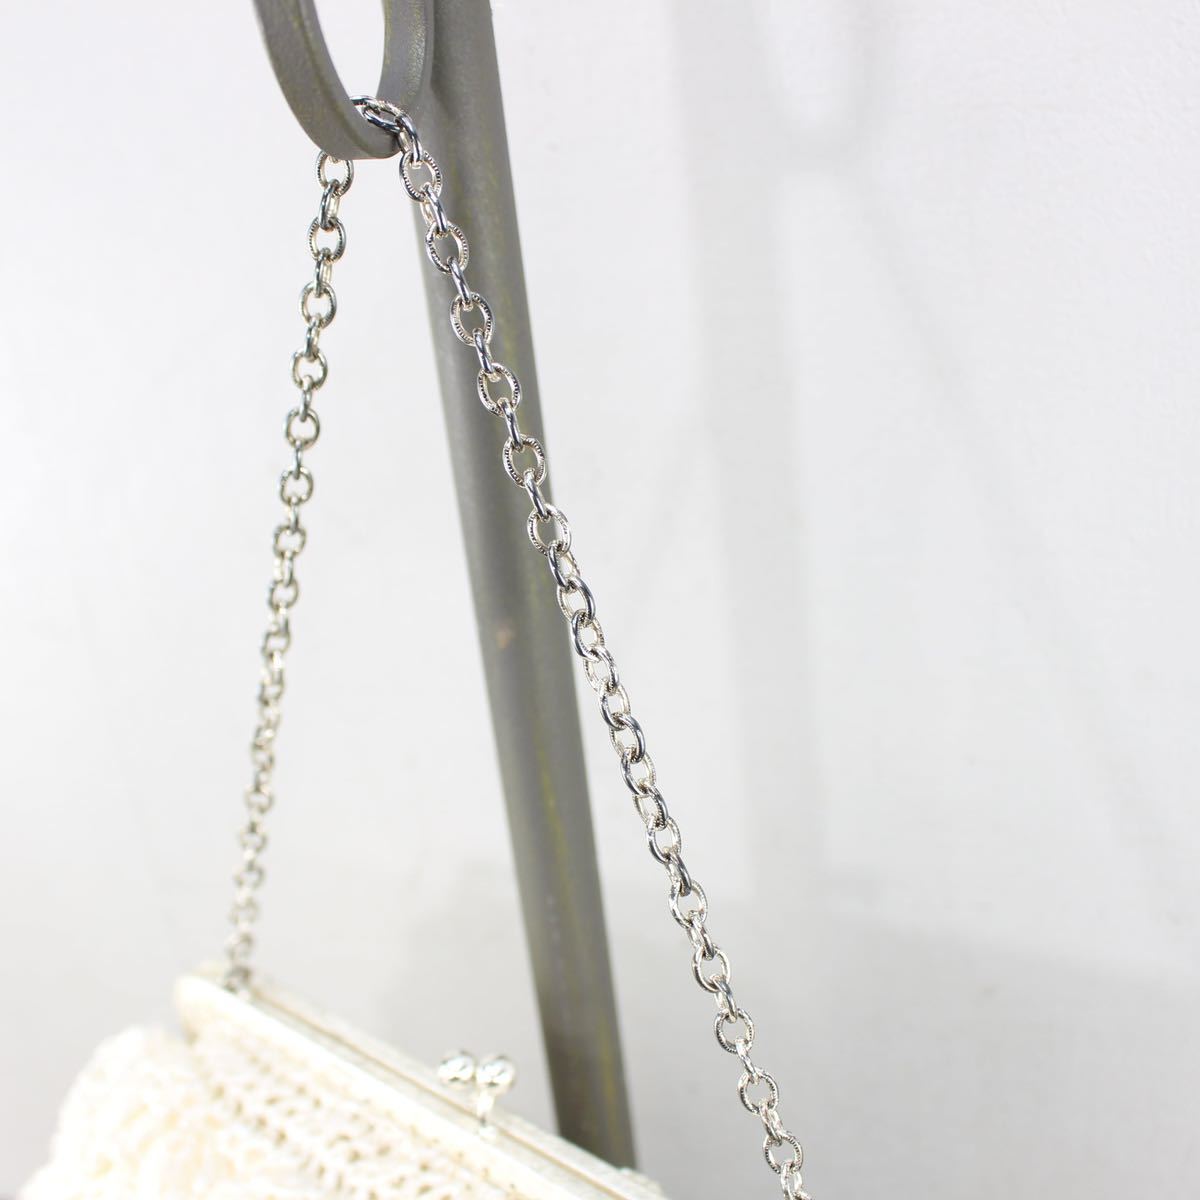 USA VINTAGE BEADS GAMAGUCHI DESIGN CHAIN SHOULDER BAG/アメリカ古着ビーズがま口デザインチェーンショルダーバッグ